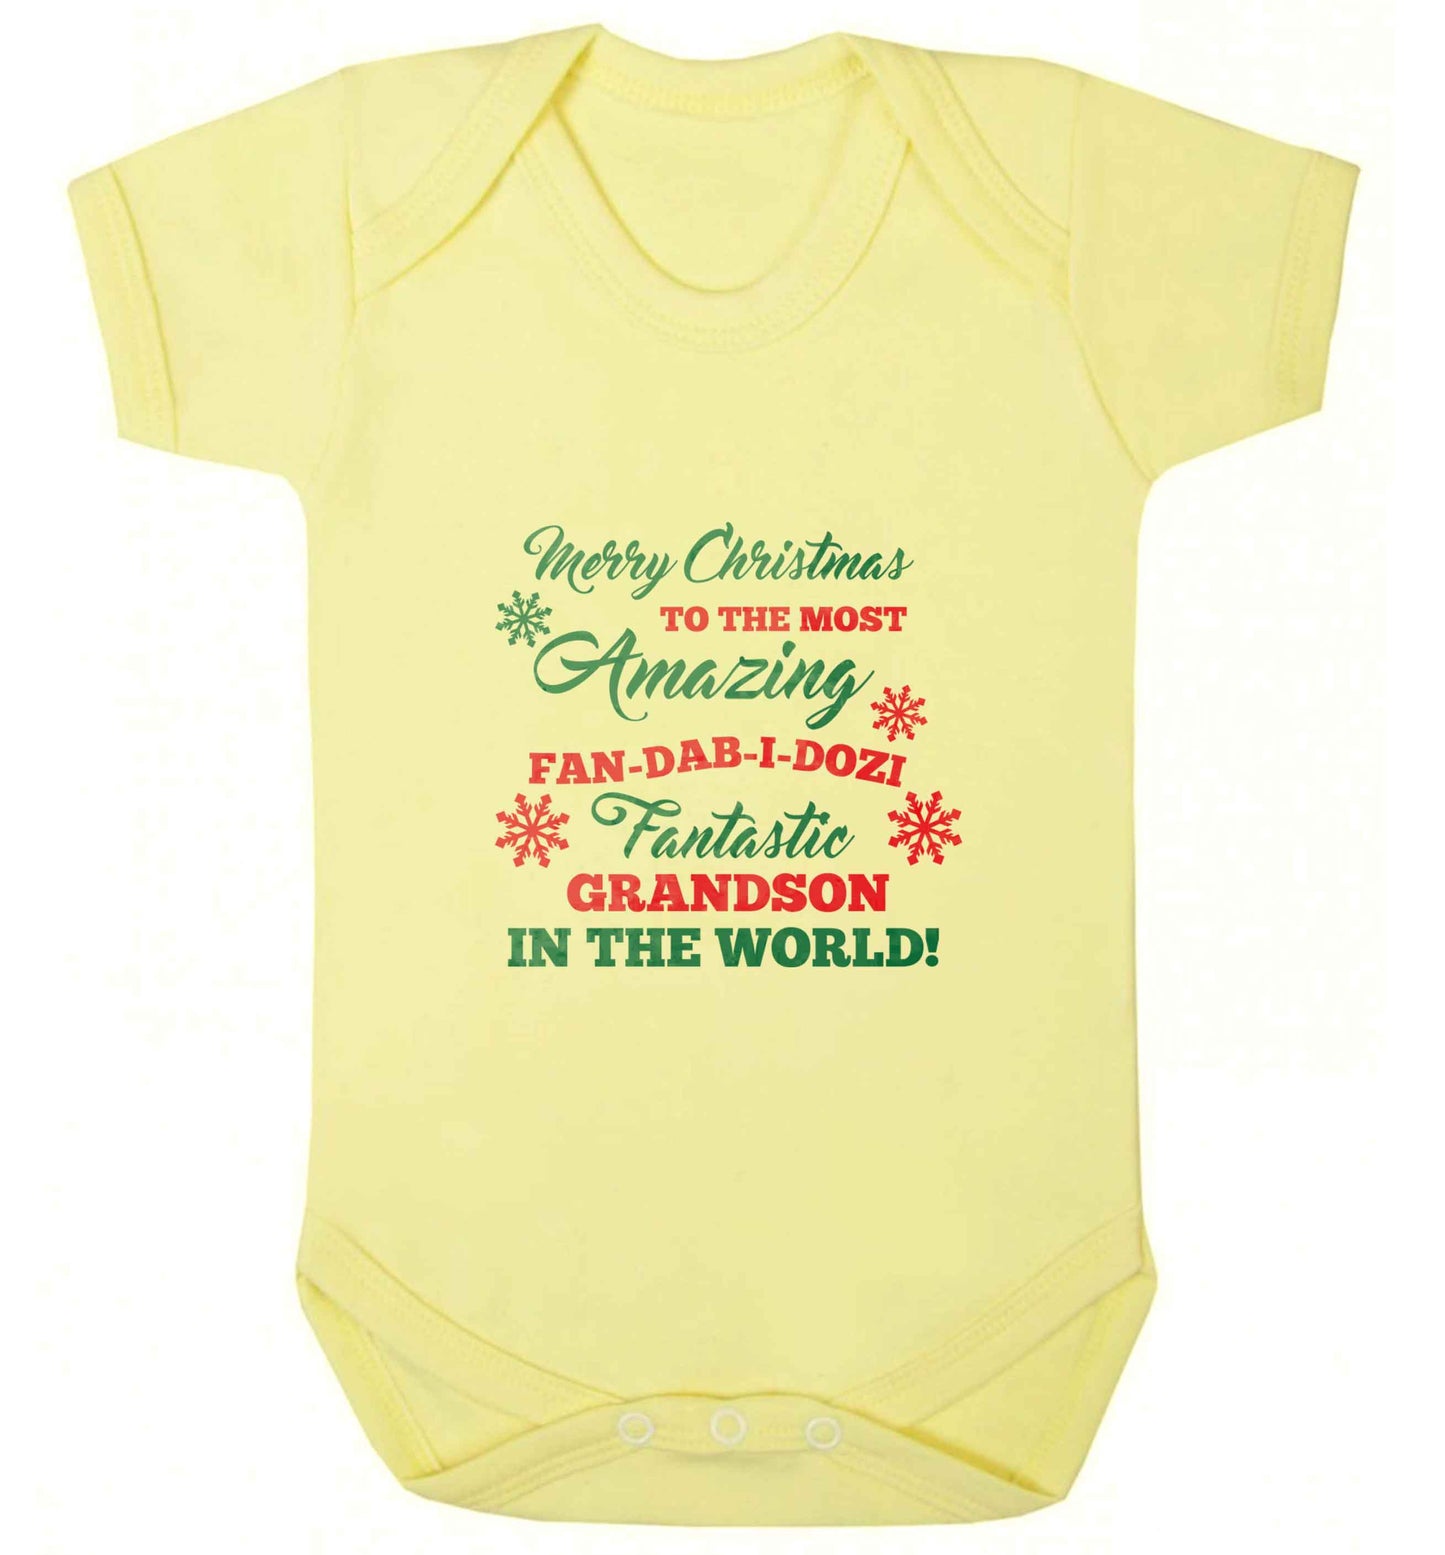 Merry Christmas to the most amazing fan-dab-i-dozi fantasic Grandson in the world baby vest pale yellow 18-24 months